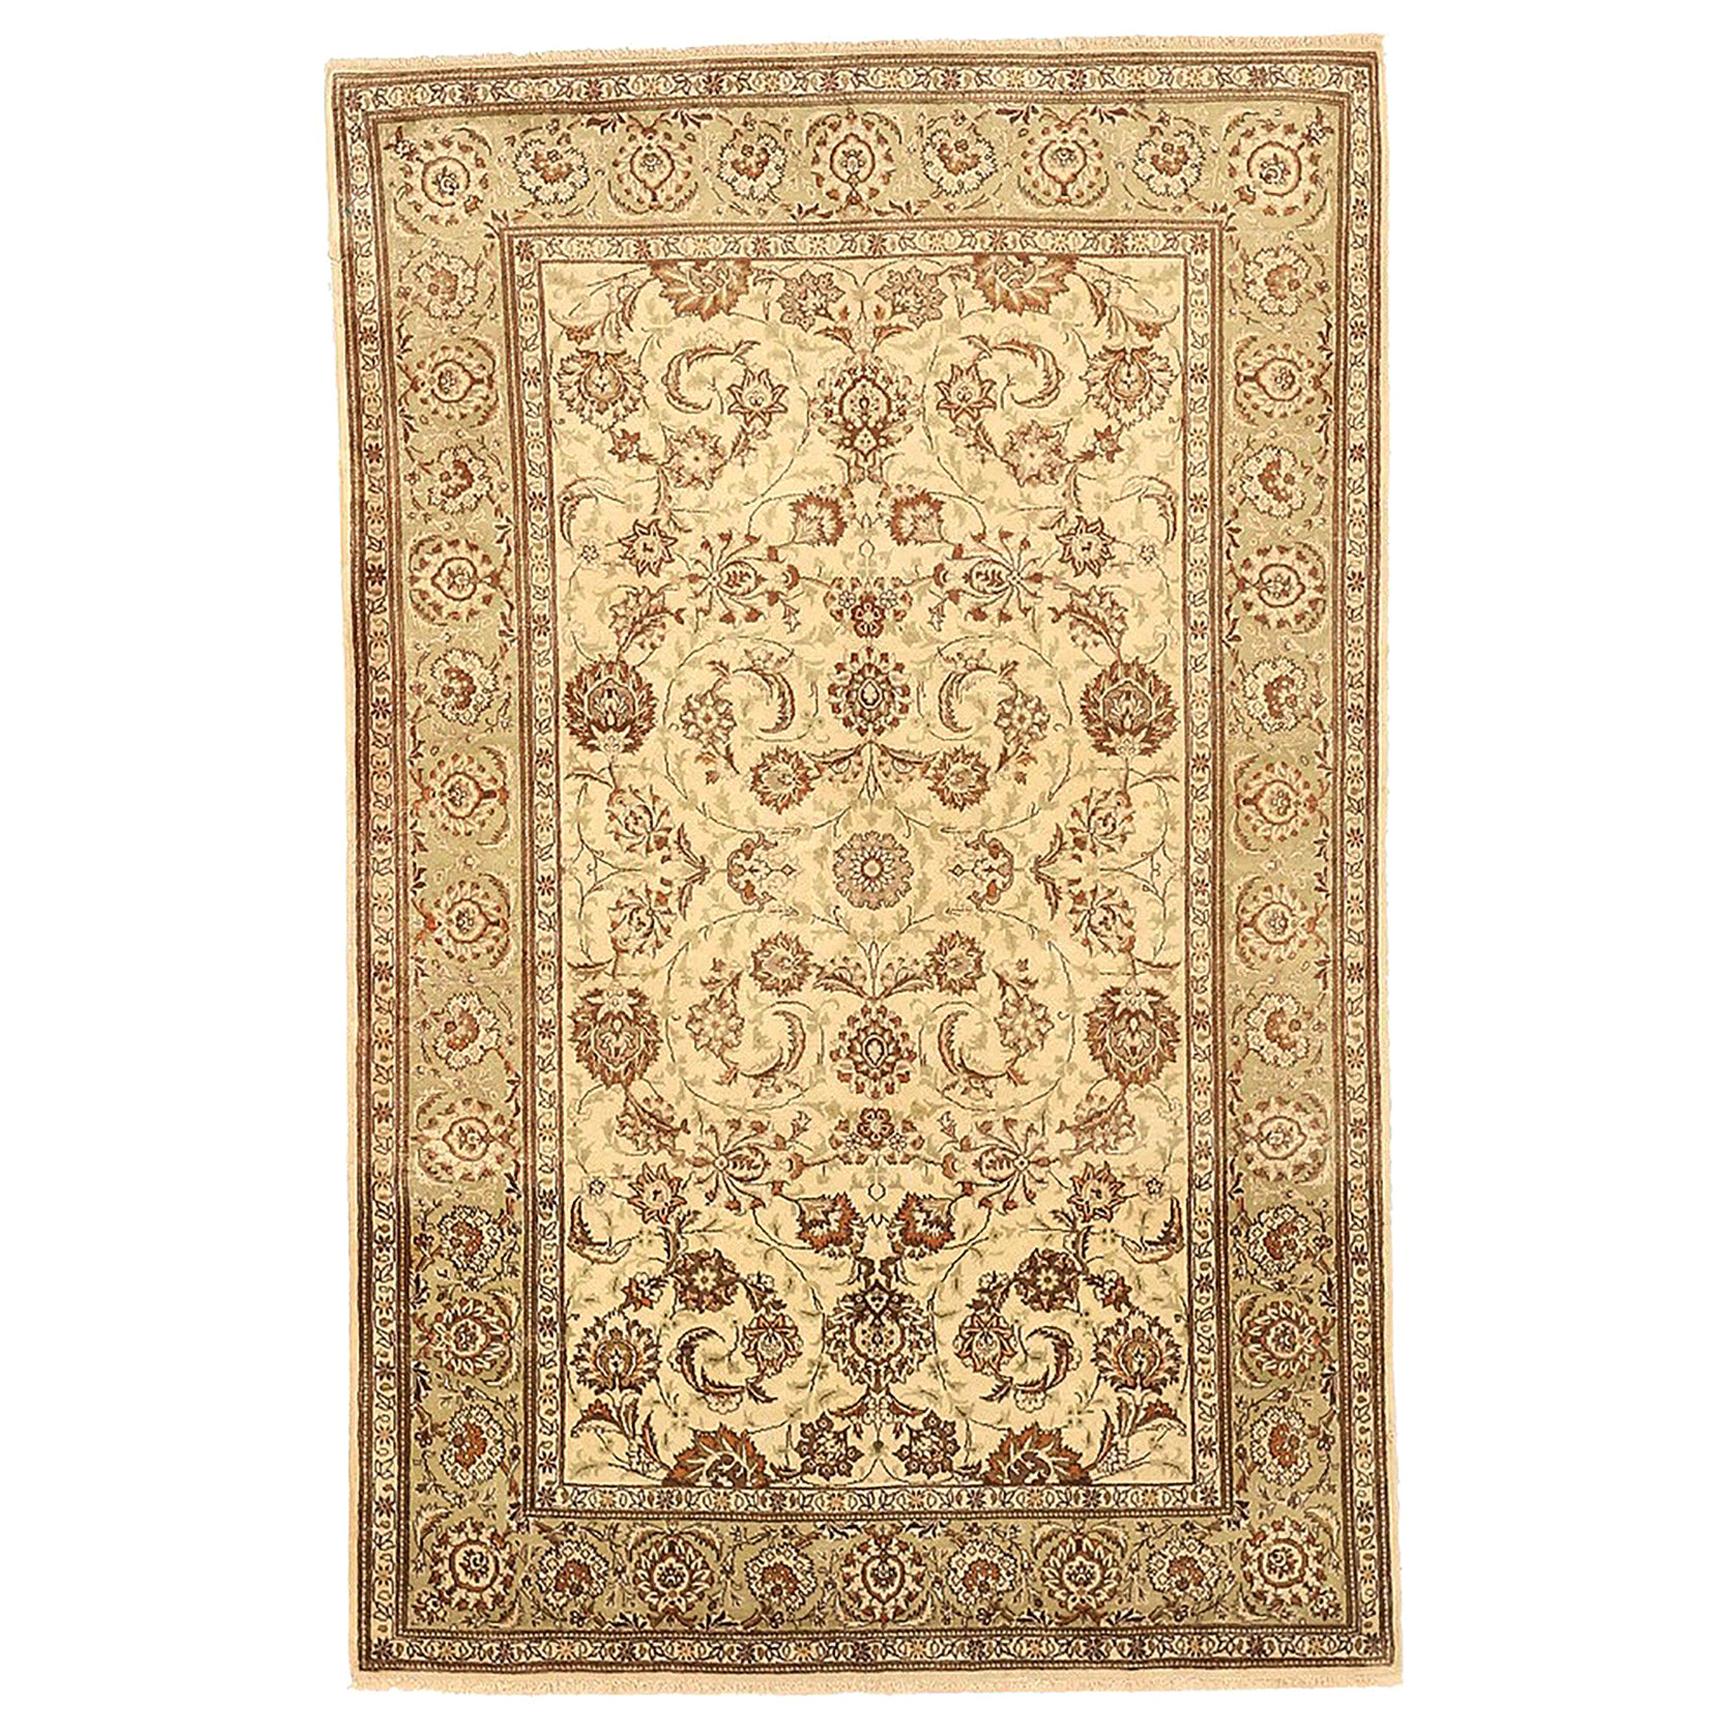 Antique Persian Kashan Rug with Brown and White Floral Details Over Ivory Field